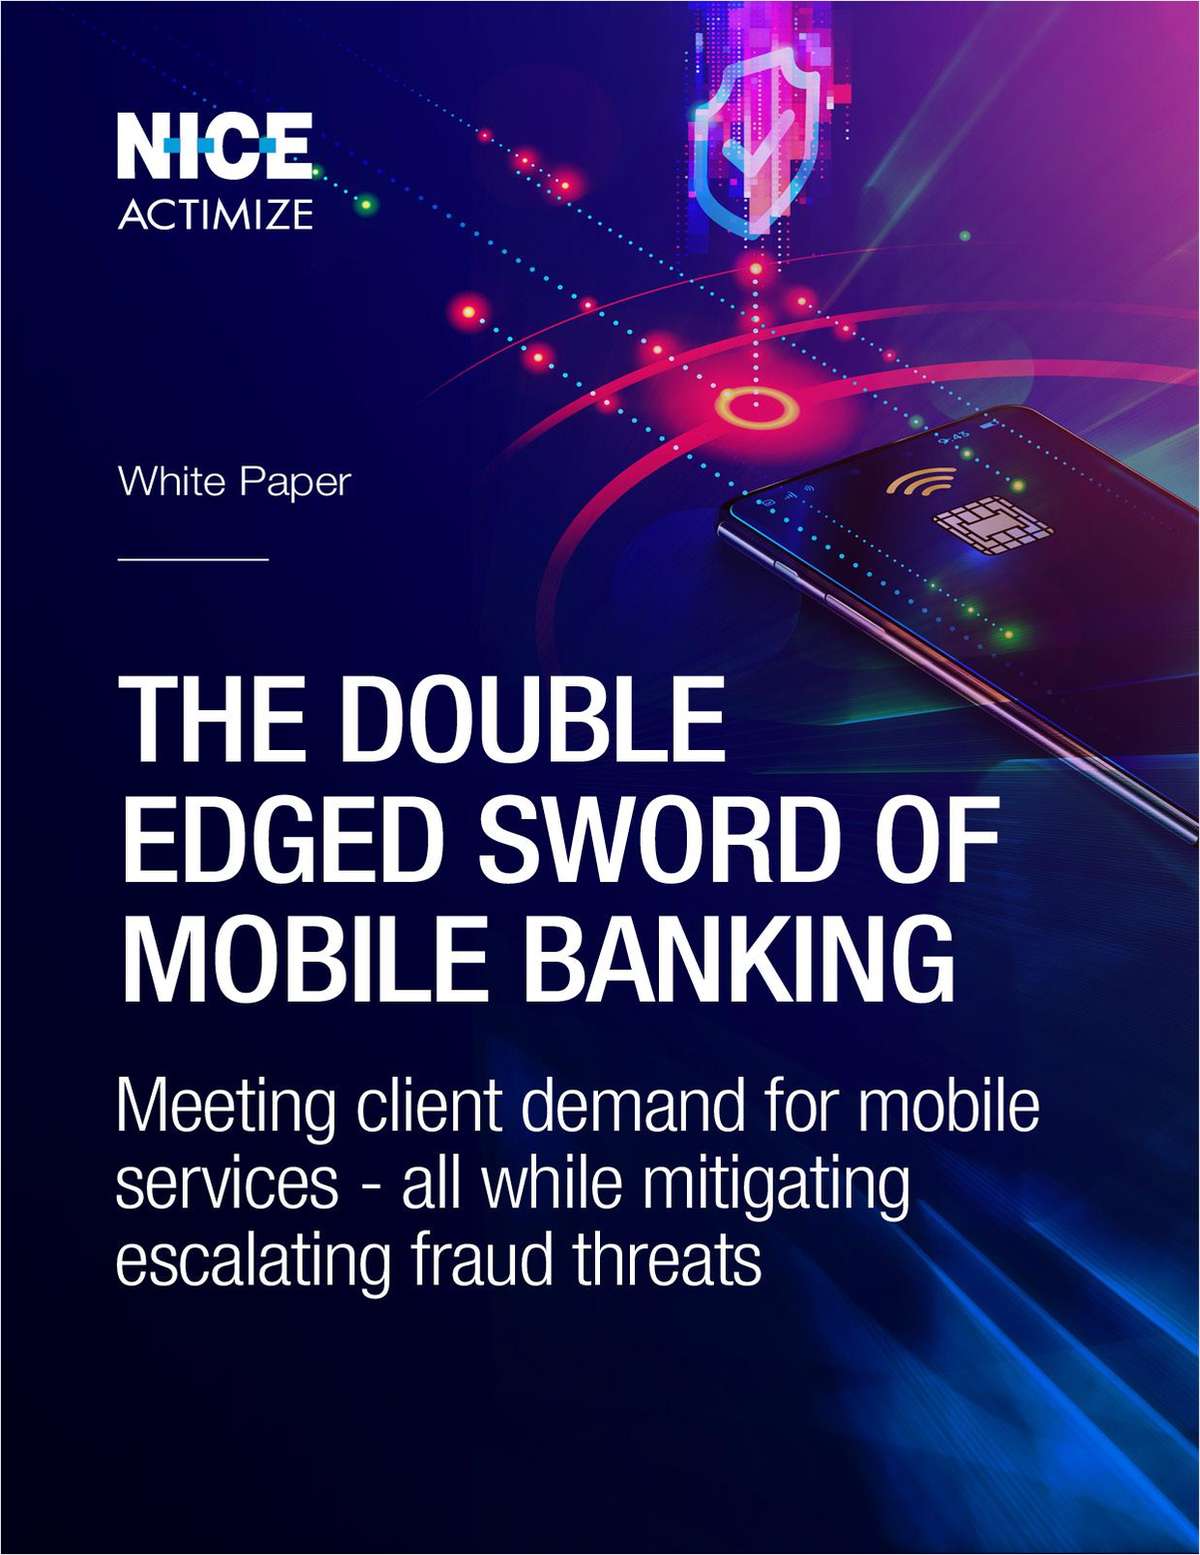 The Double Edged Sword of Mobile Banking